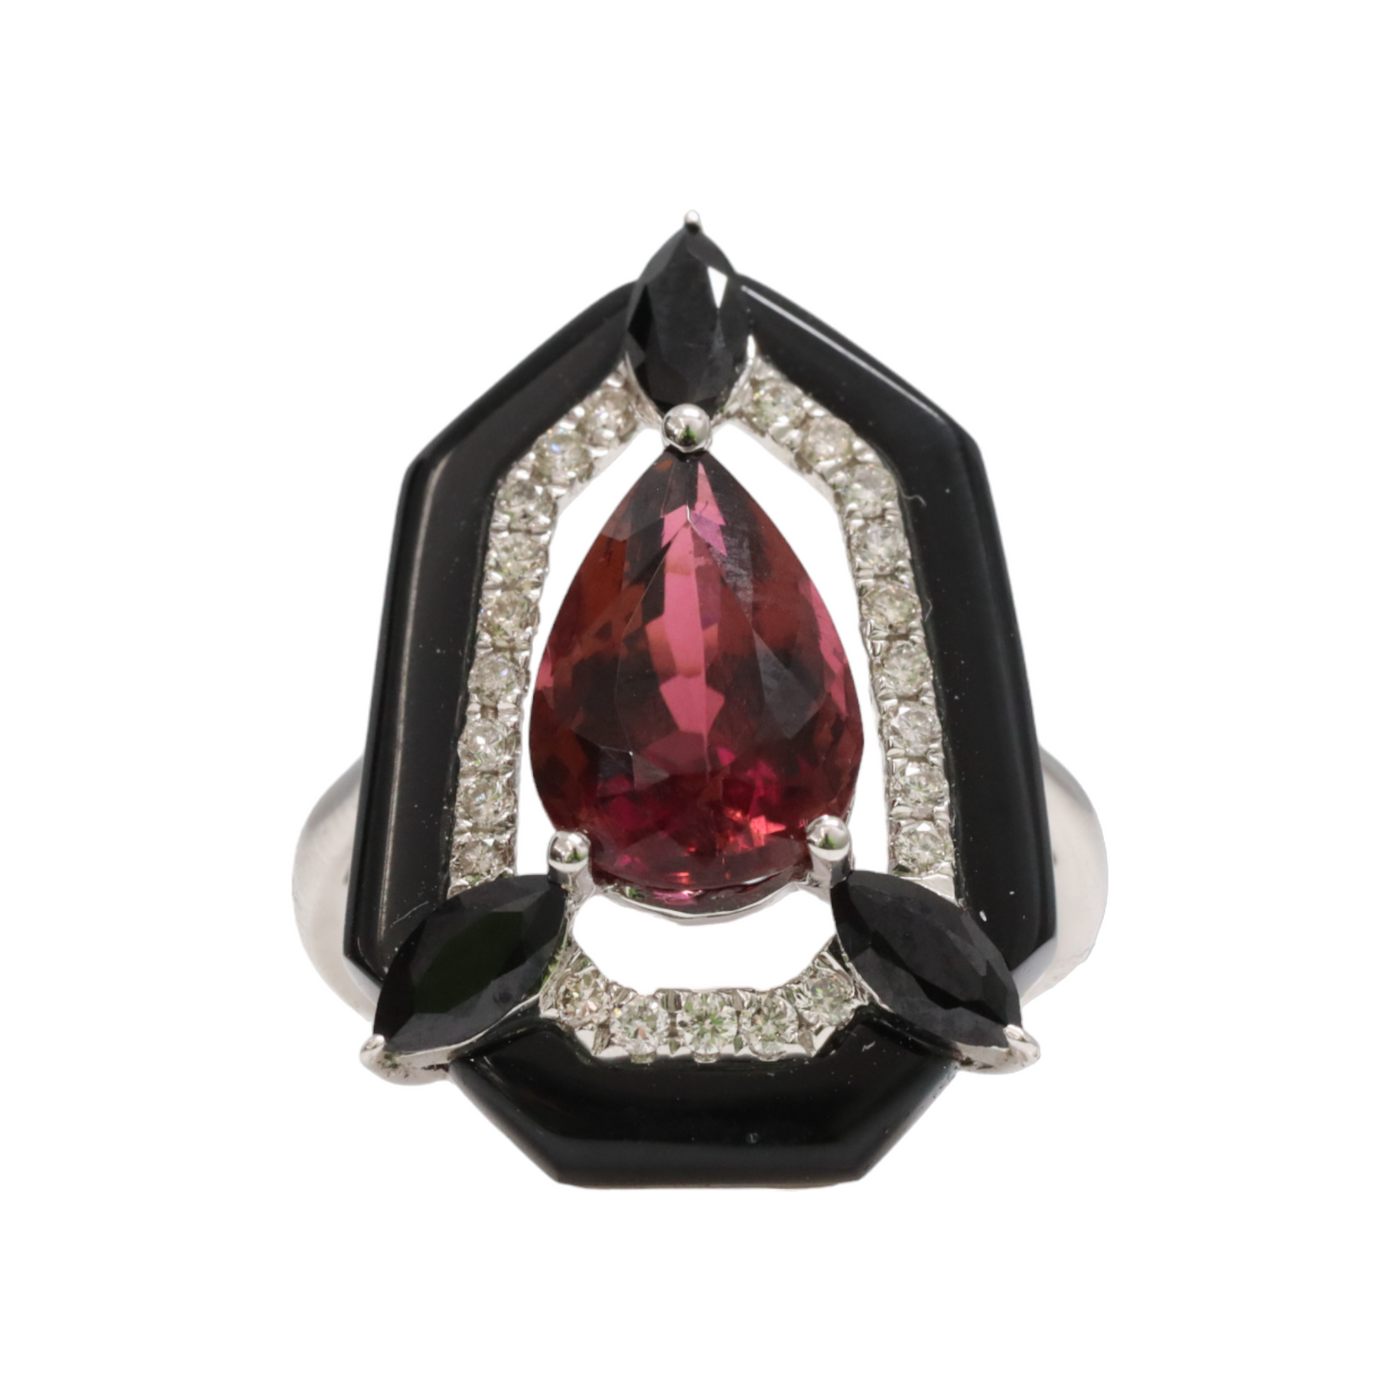 Tourmaline, Spinel and Diamonds in 18ct White Gold